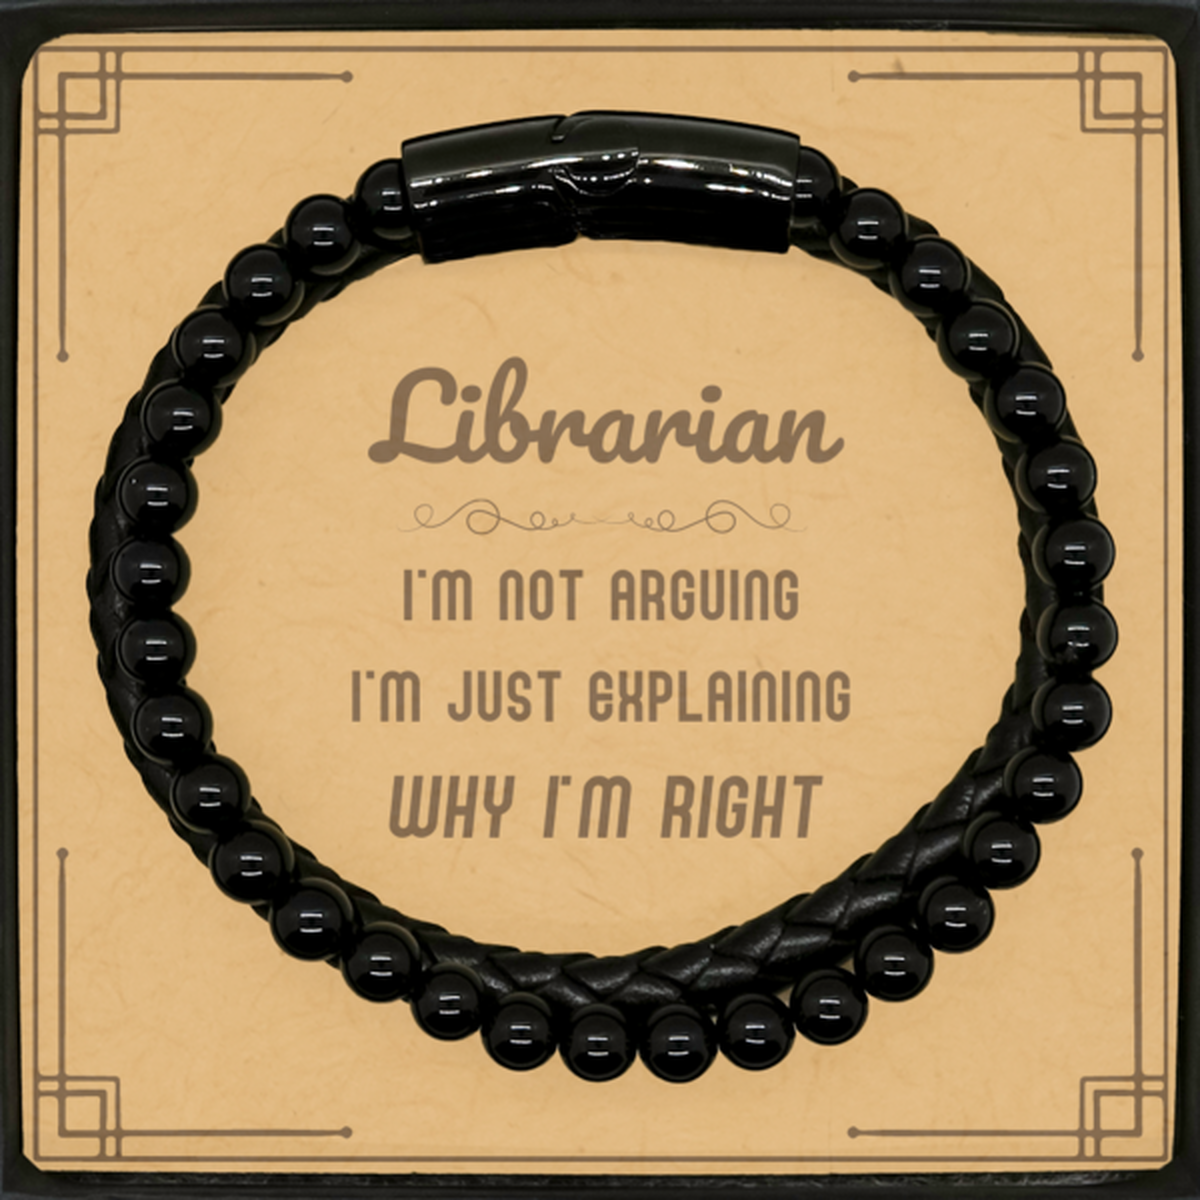 Librarian I'm not Arguing. I'm Just Explaining Why I'm RIGHT Stone Leather Bracelets, Funny Saying Quote Librarian Gifts For Librarian Message Card Graduation Birthday Christmas Gifts for Men Women Coworker